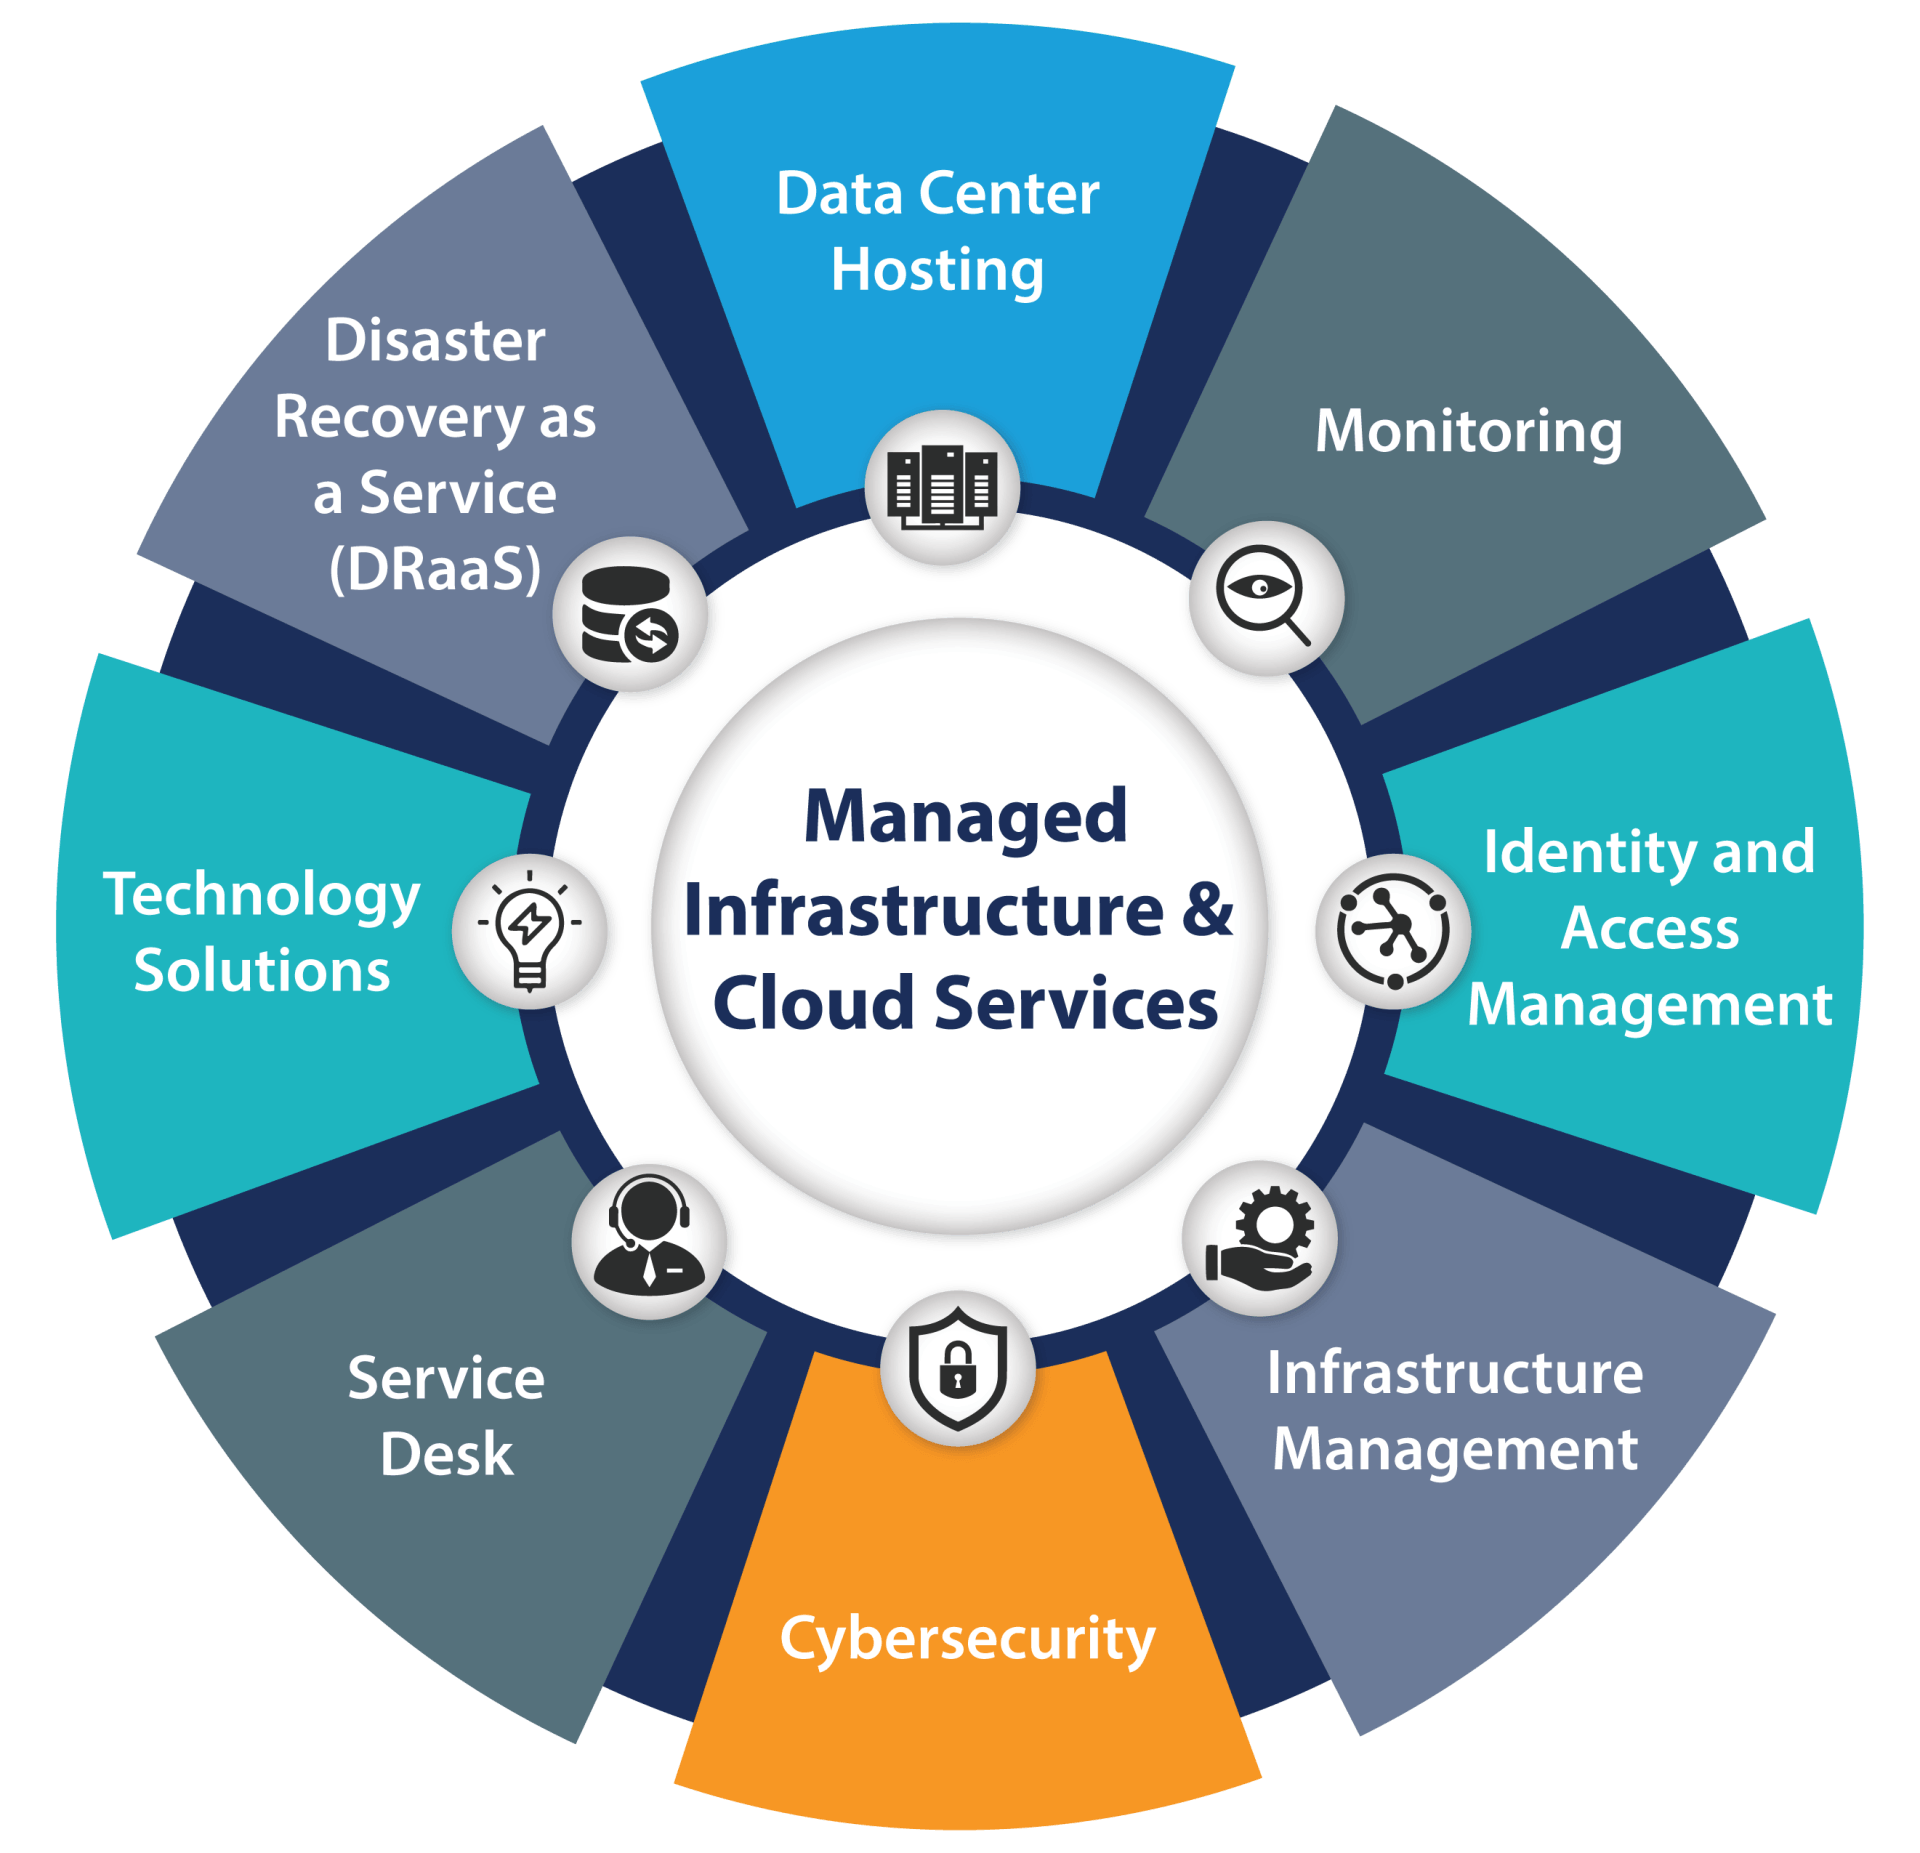 infrastructure-management-solutions-blusonic